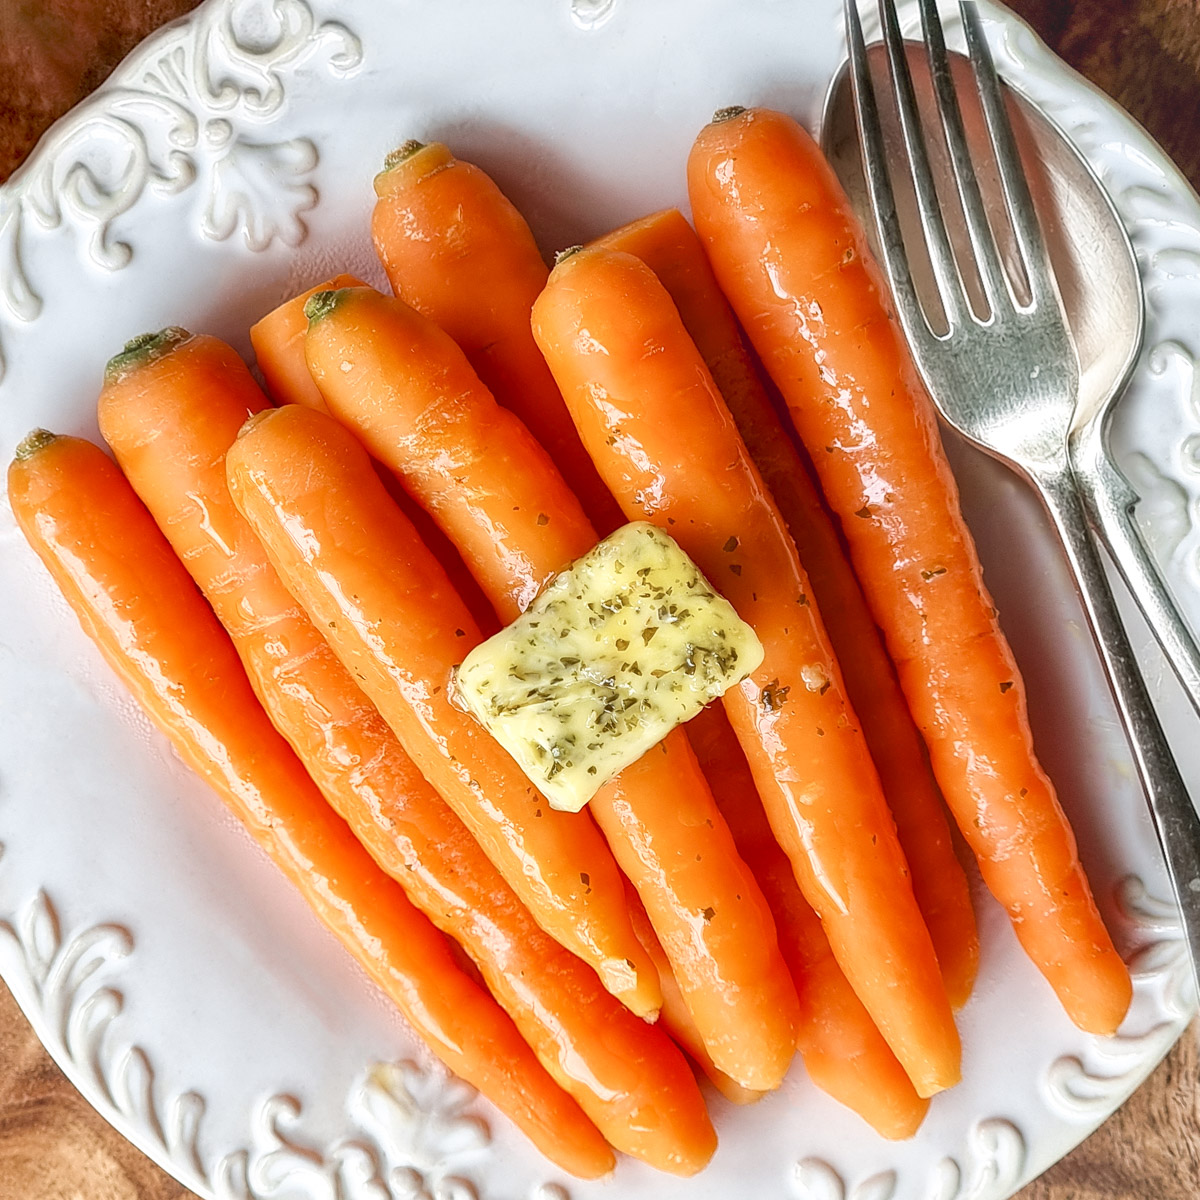 Microwave steamed carrots on a white plate.